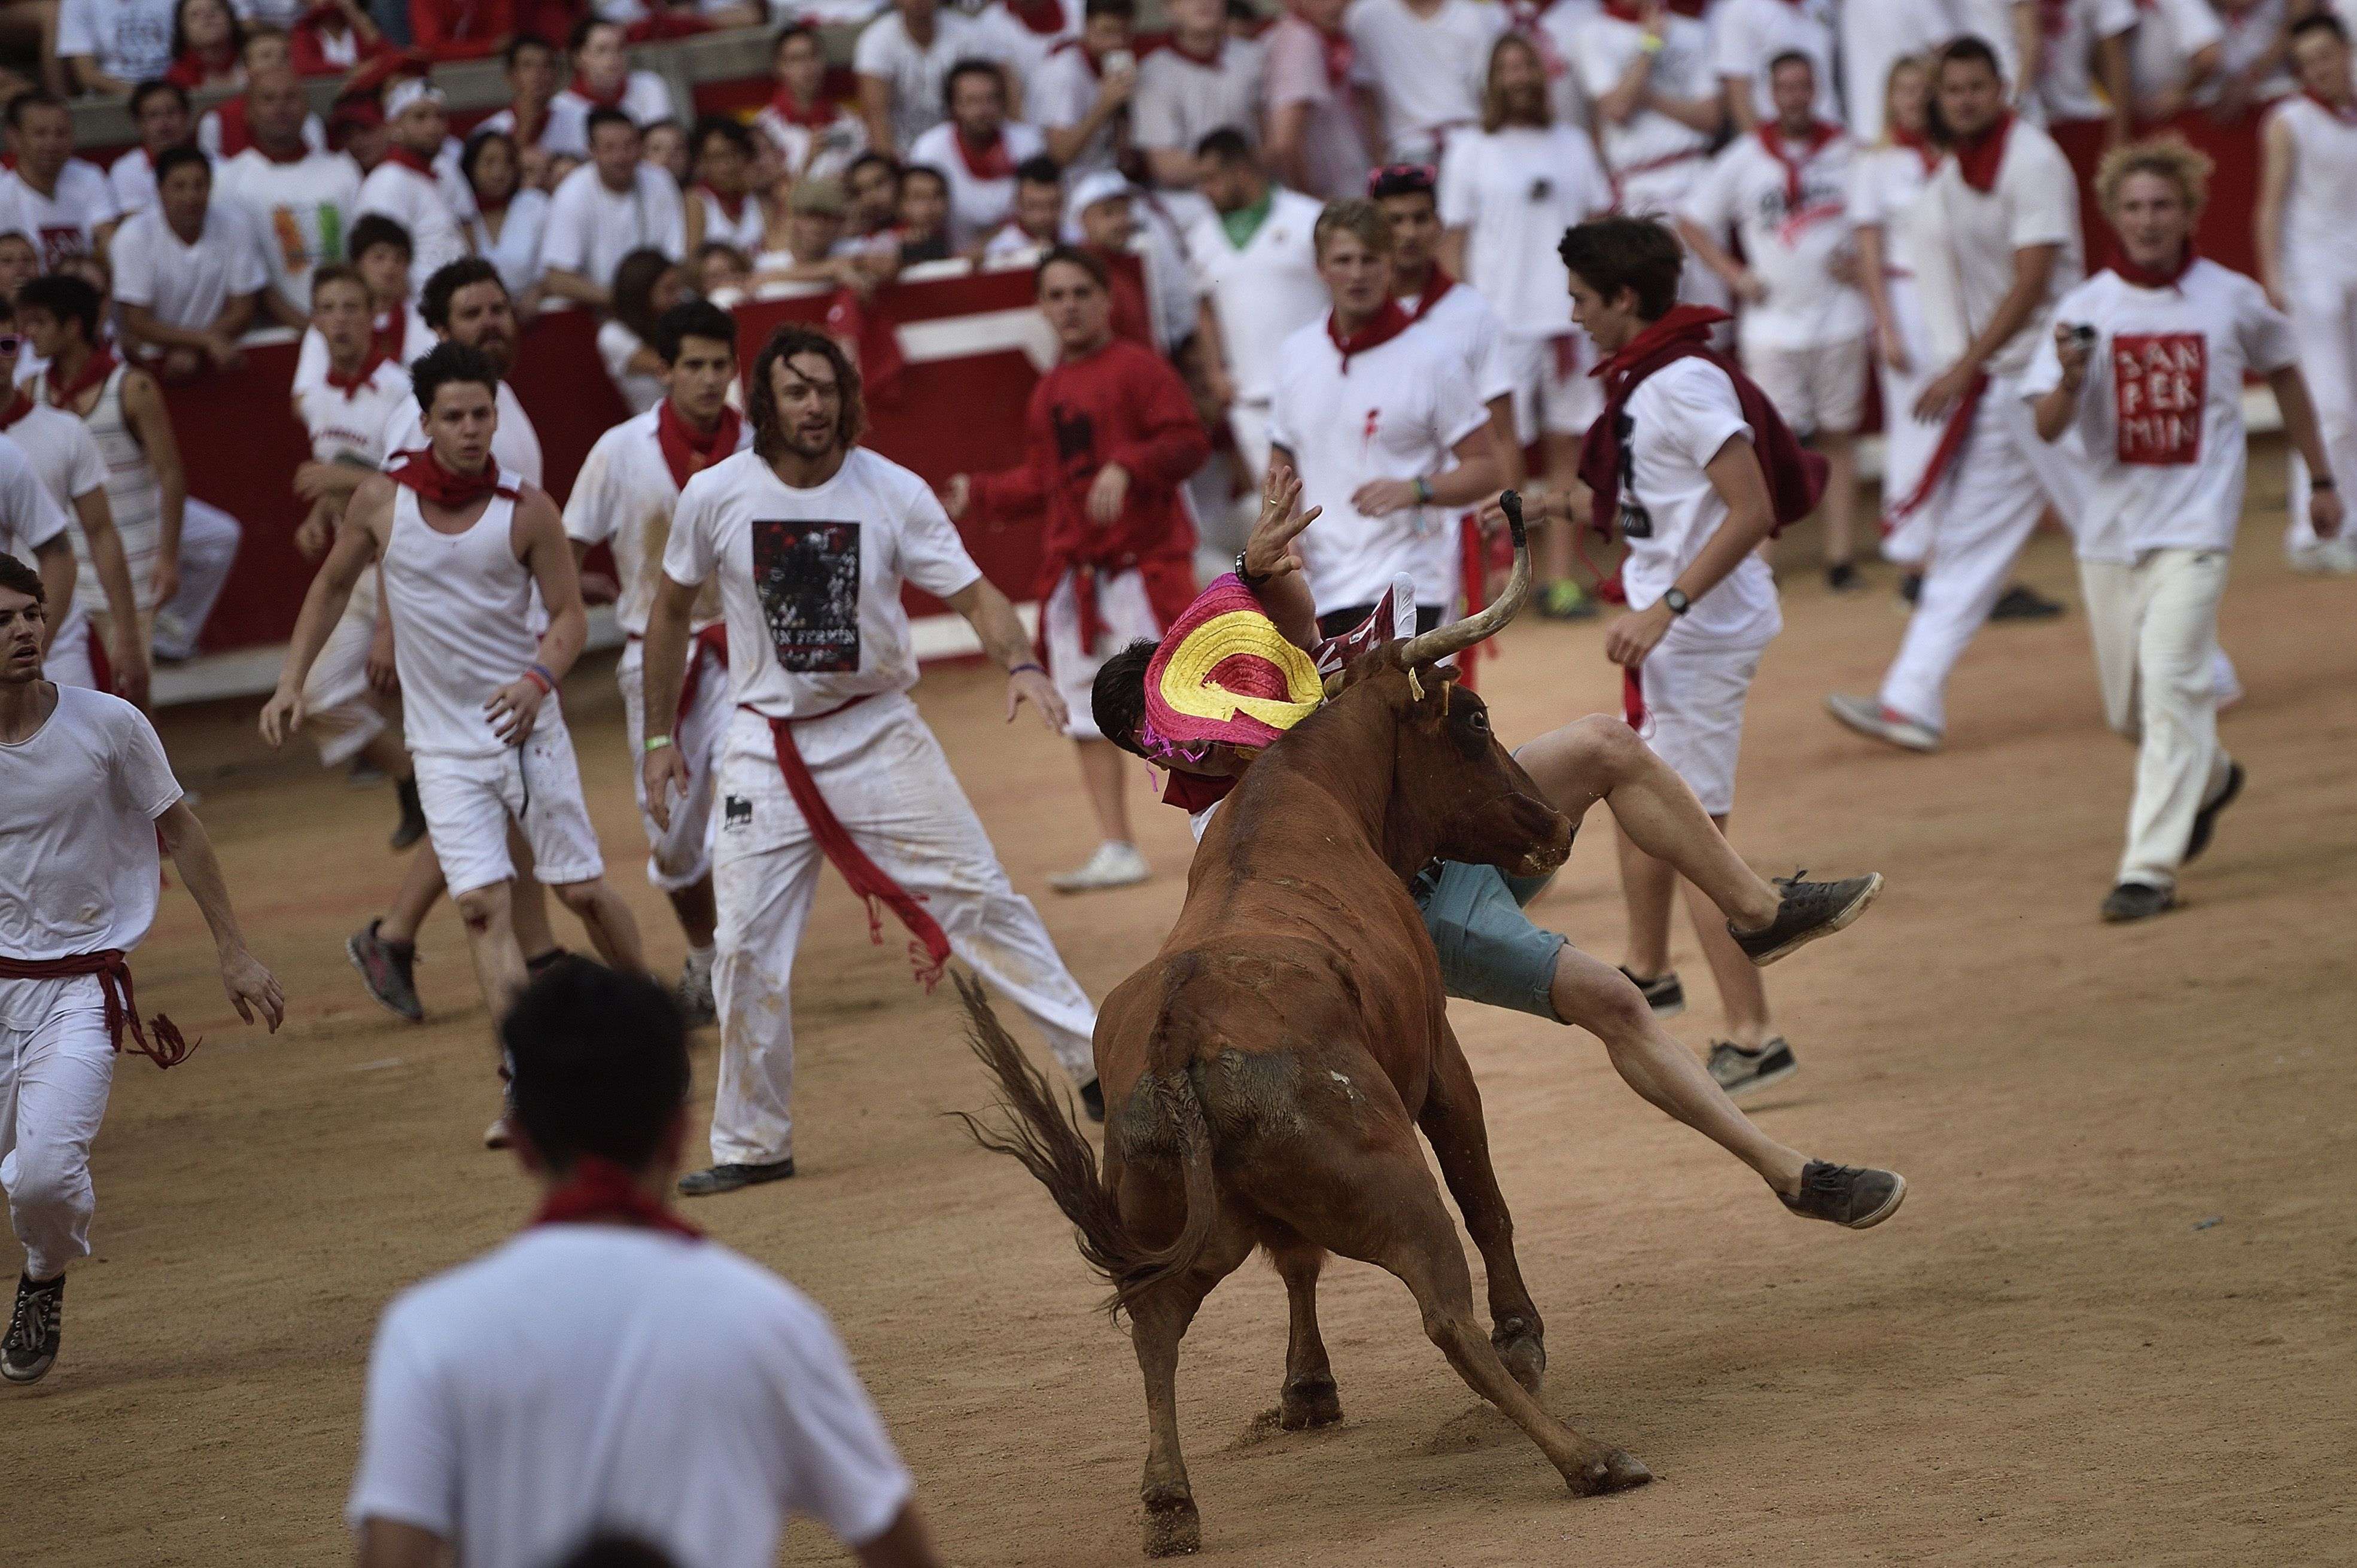 A reveler is pushed by a cow during the cow's festival at the end of the second running of the bulls at the San Fermin Festival, in Pamplona, norther Spain, Friday, July 8, 2016. Revelers from around the world arrive to Pamplona every year to take part in some of the eight days of the running of the bulls. (AP Photo/Alvaro Barrientos)